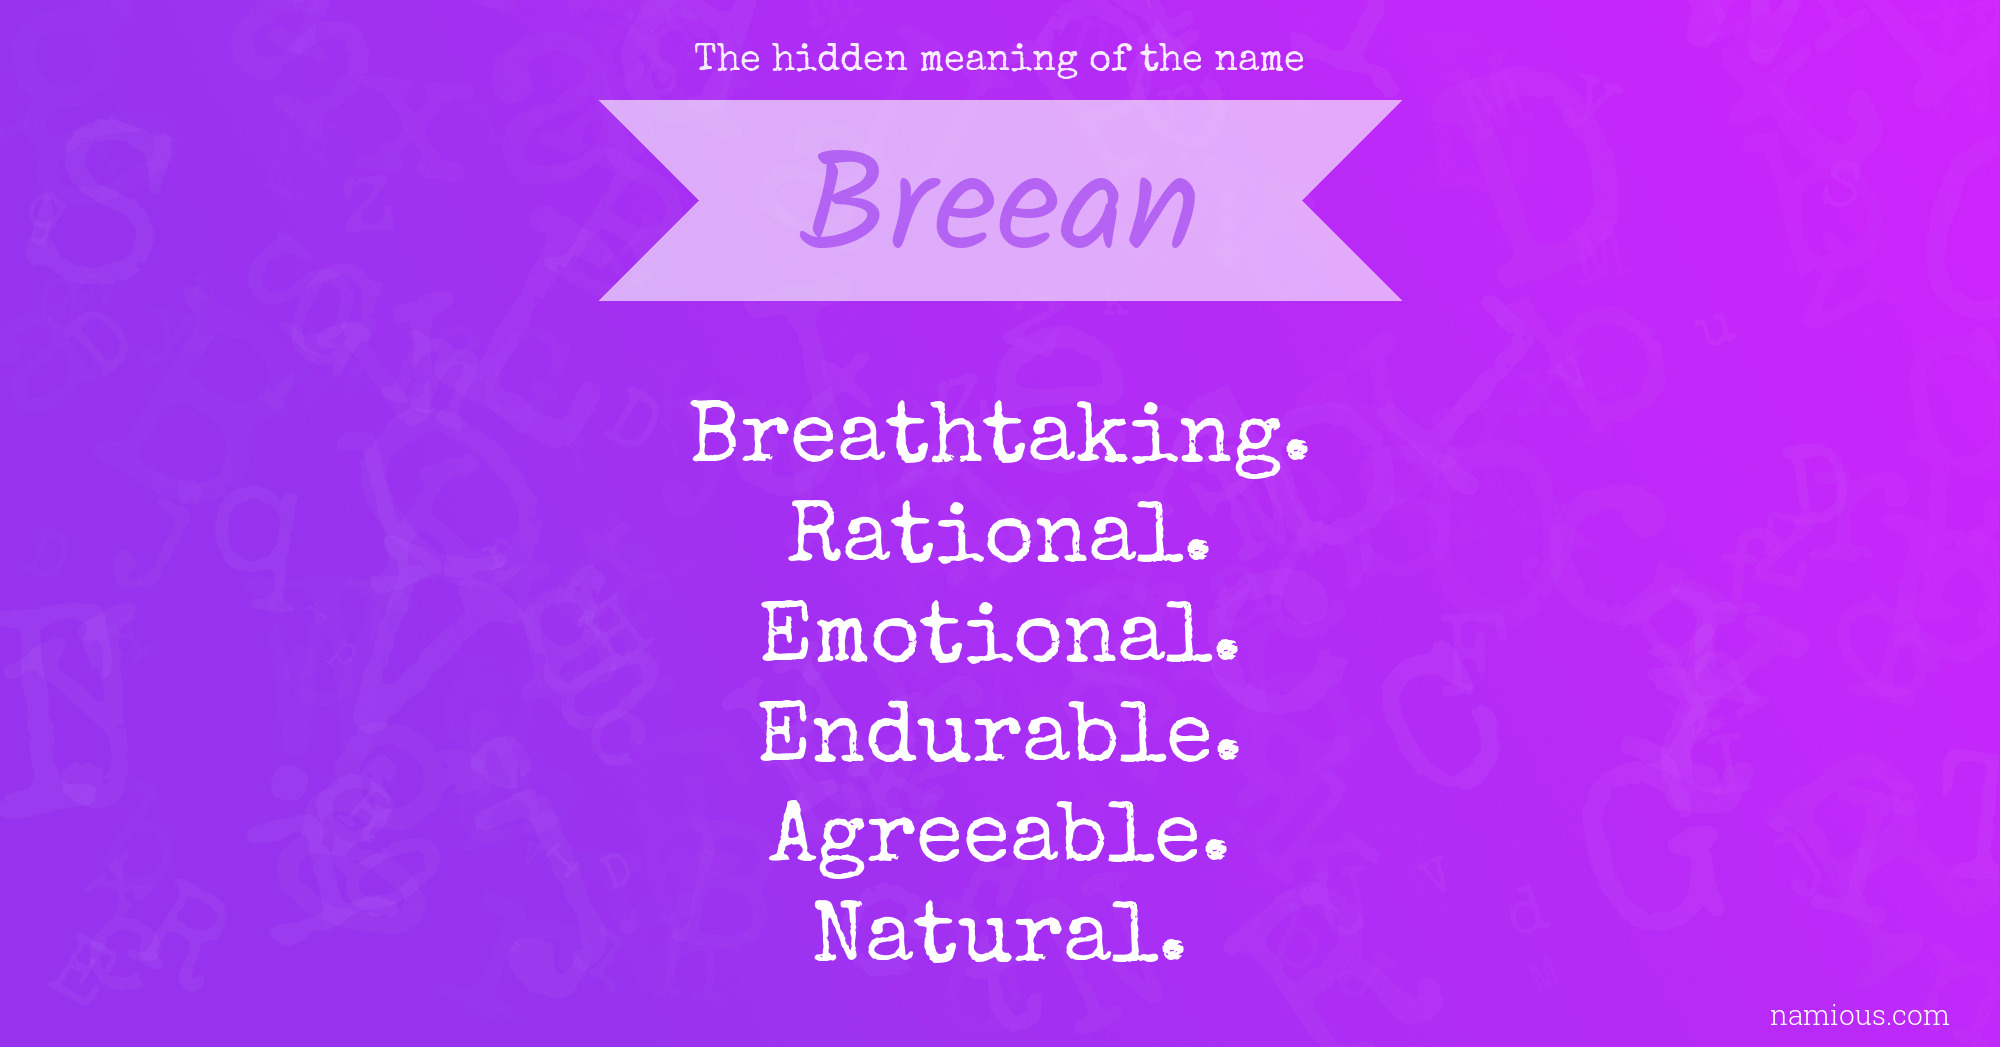 The hidden meaning of the name Breean